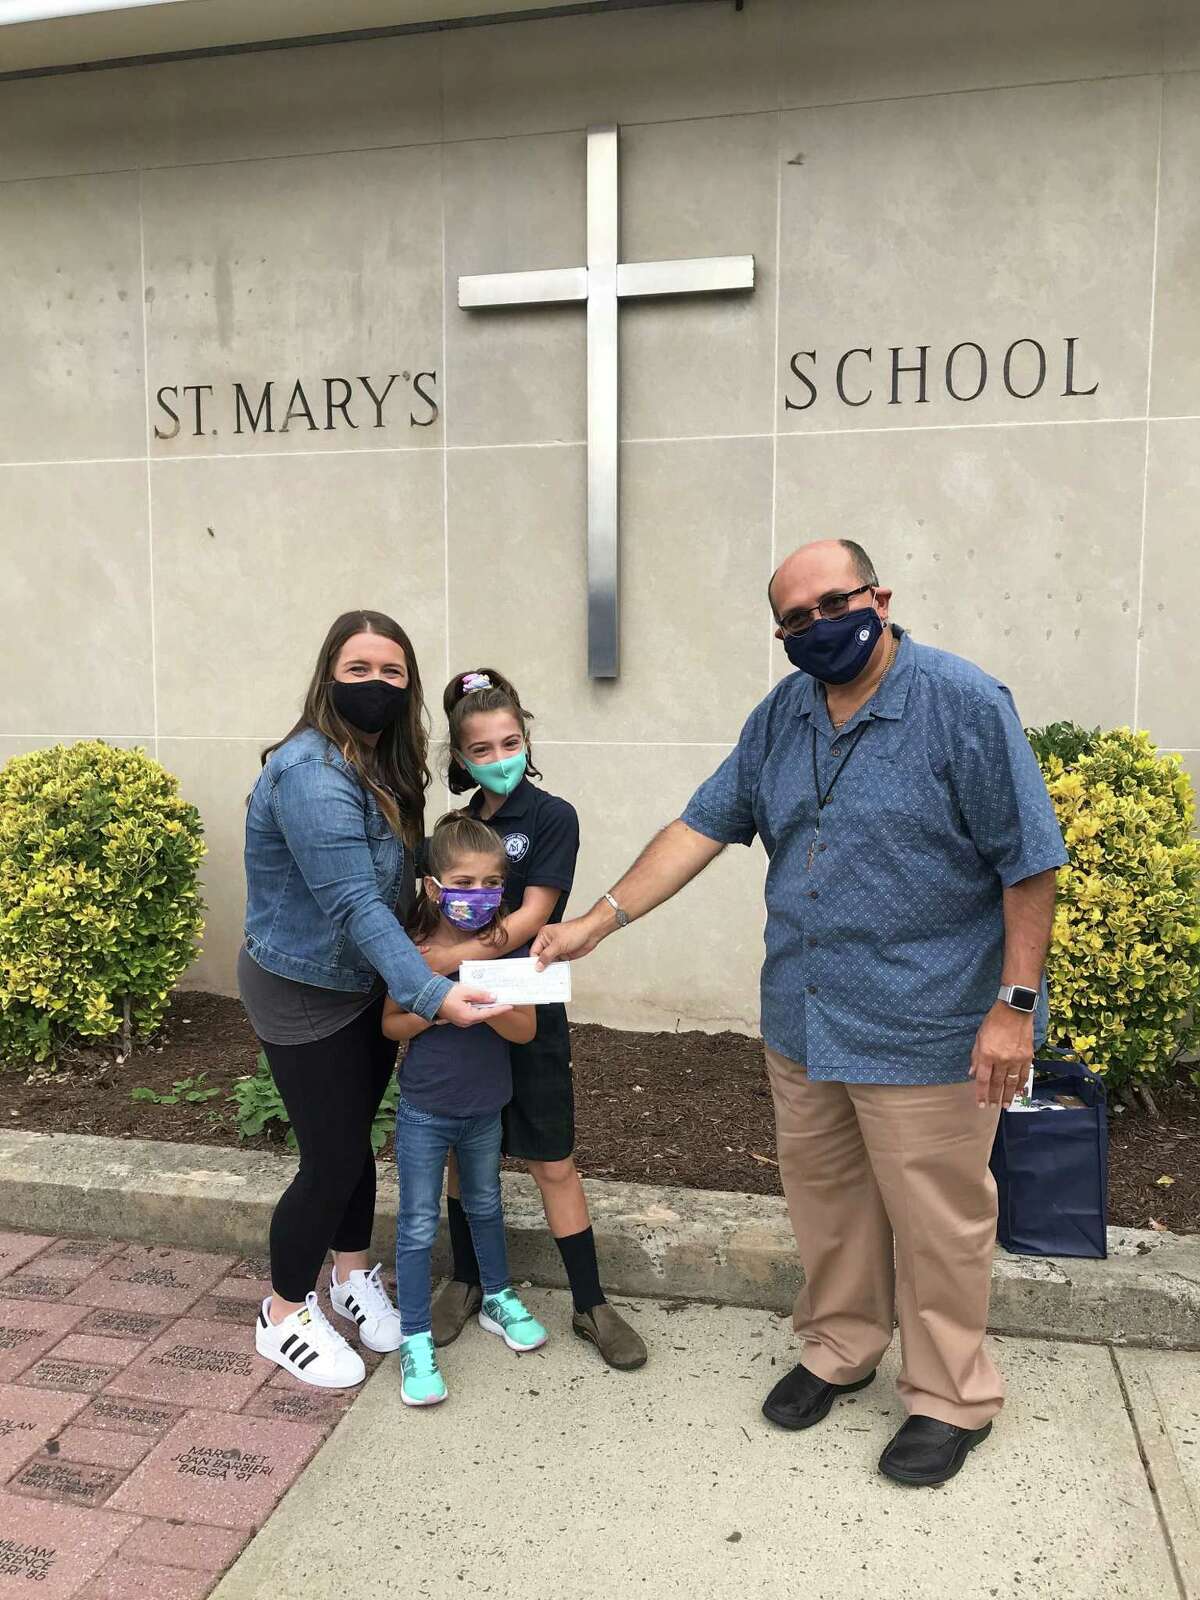 St. Mary School in Milford thanked their friends at Jimmy's Apizza for supporting their school at the fourth annual SMS Family Pizza Night, Curbside Edition. A portion of the night's sales and raffle proceeds totaling more than $1,000 were donated to the school. Jimmy and Sue Ormrod, the Hogan family, the hard workers at Jimmys and everyone who bought dinner to support the event were thanked by the school. A preschooler Cooper won the raffle basket. Pictured is Danielle Hogan with daughters Brooklyn and Devyn presenting the check to Principal Deacon Dominic Corraro.